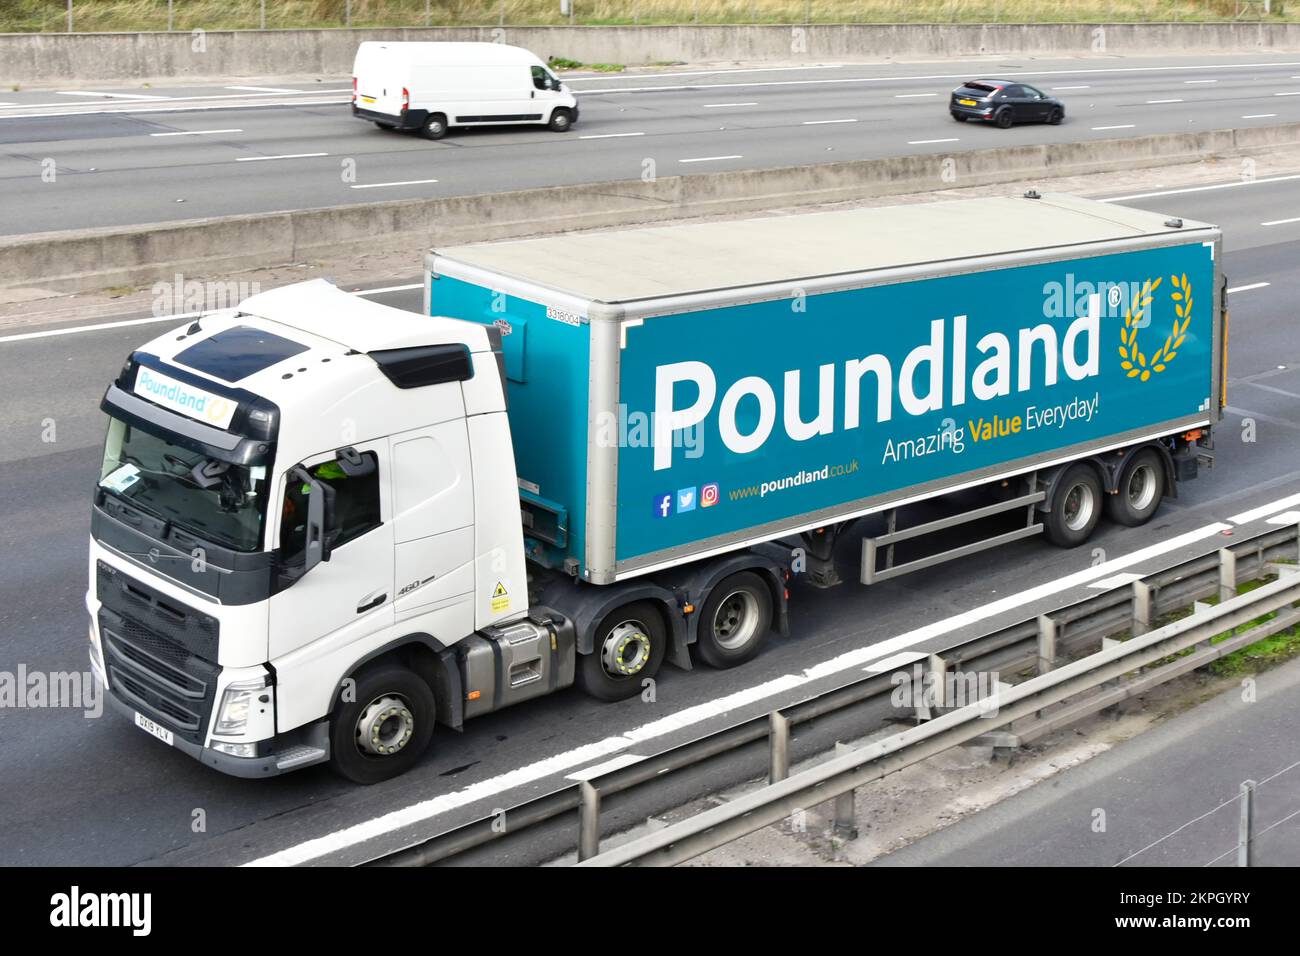 Aerial view white Volvo 460 side front view hgv lorry truck towing articulated trailer advertising for Poundland retail discount business on UK road Stock Photo